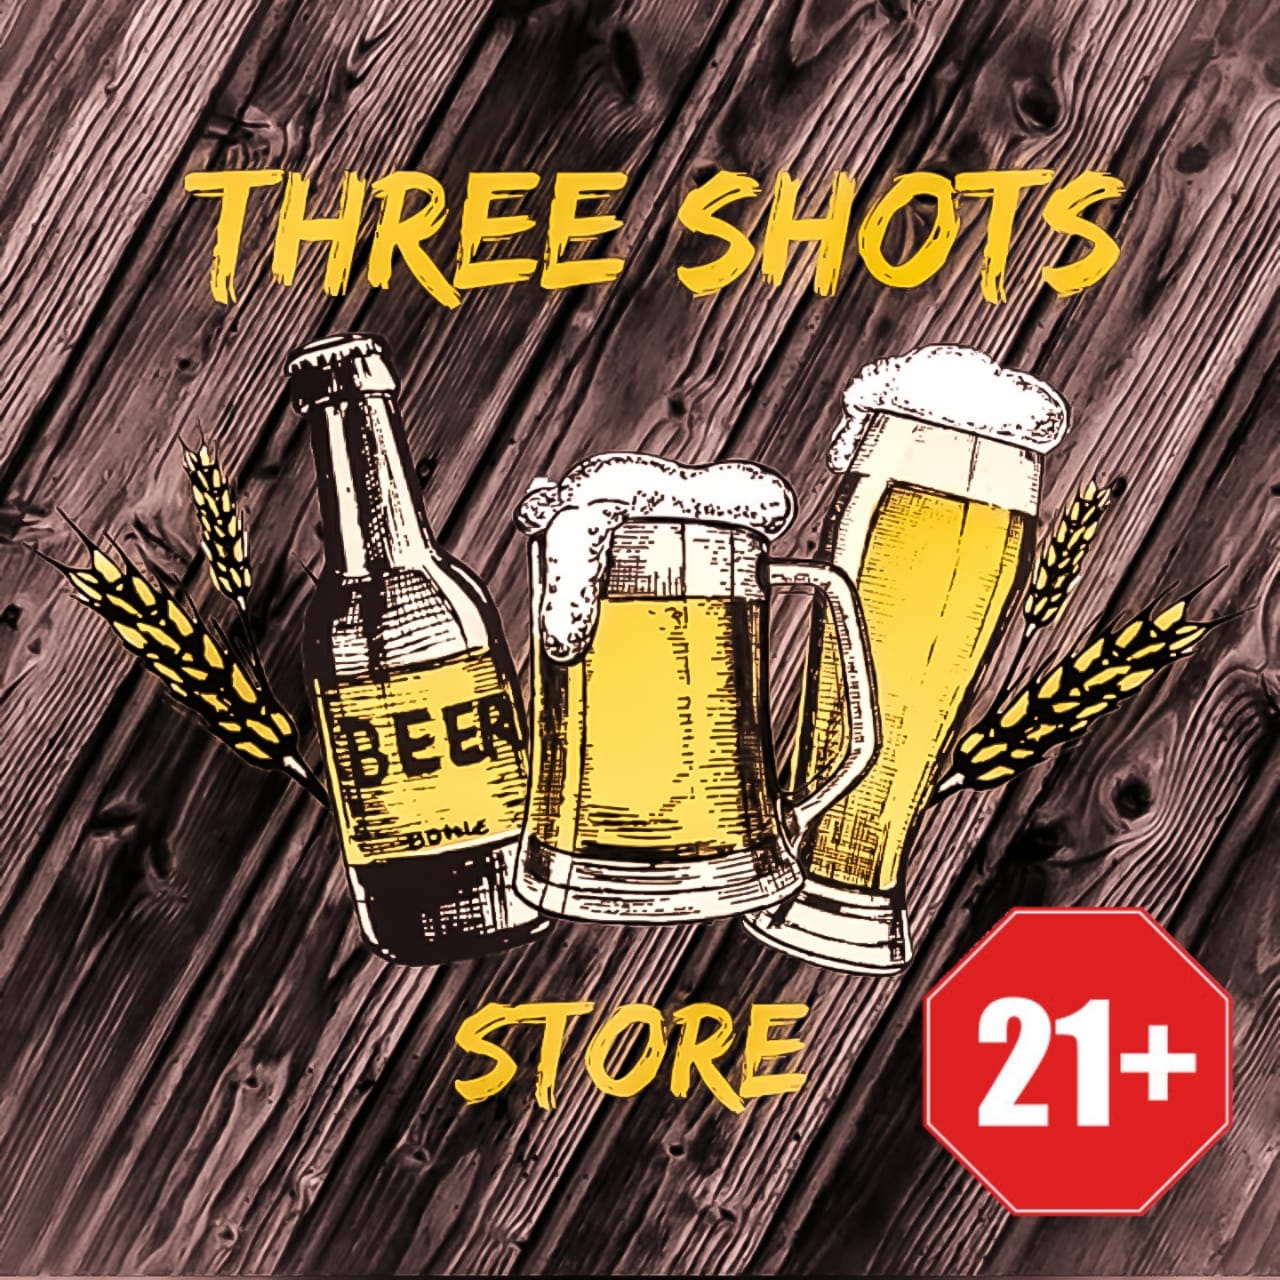 Three shots Official store